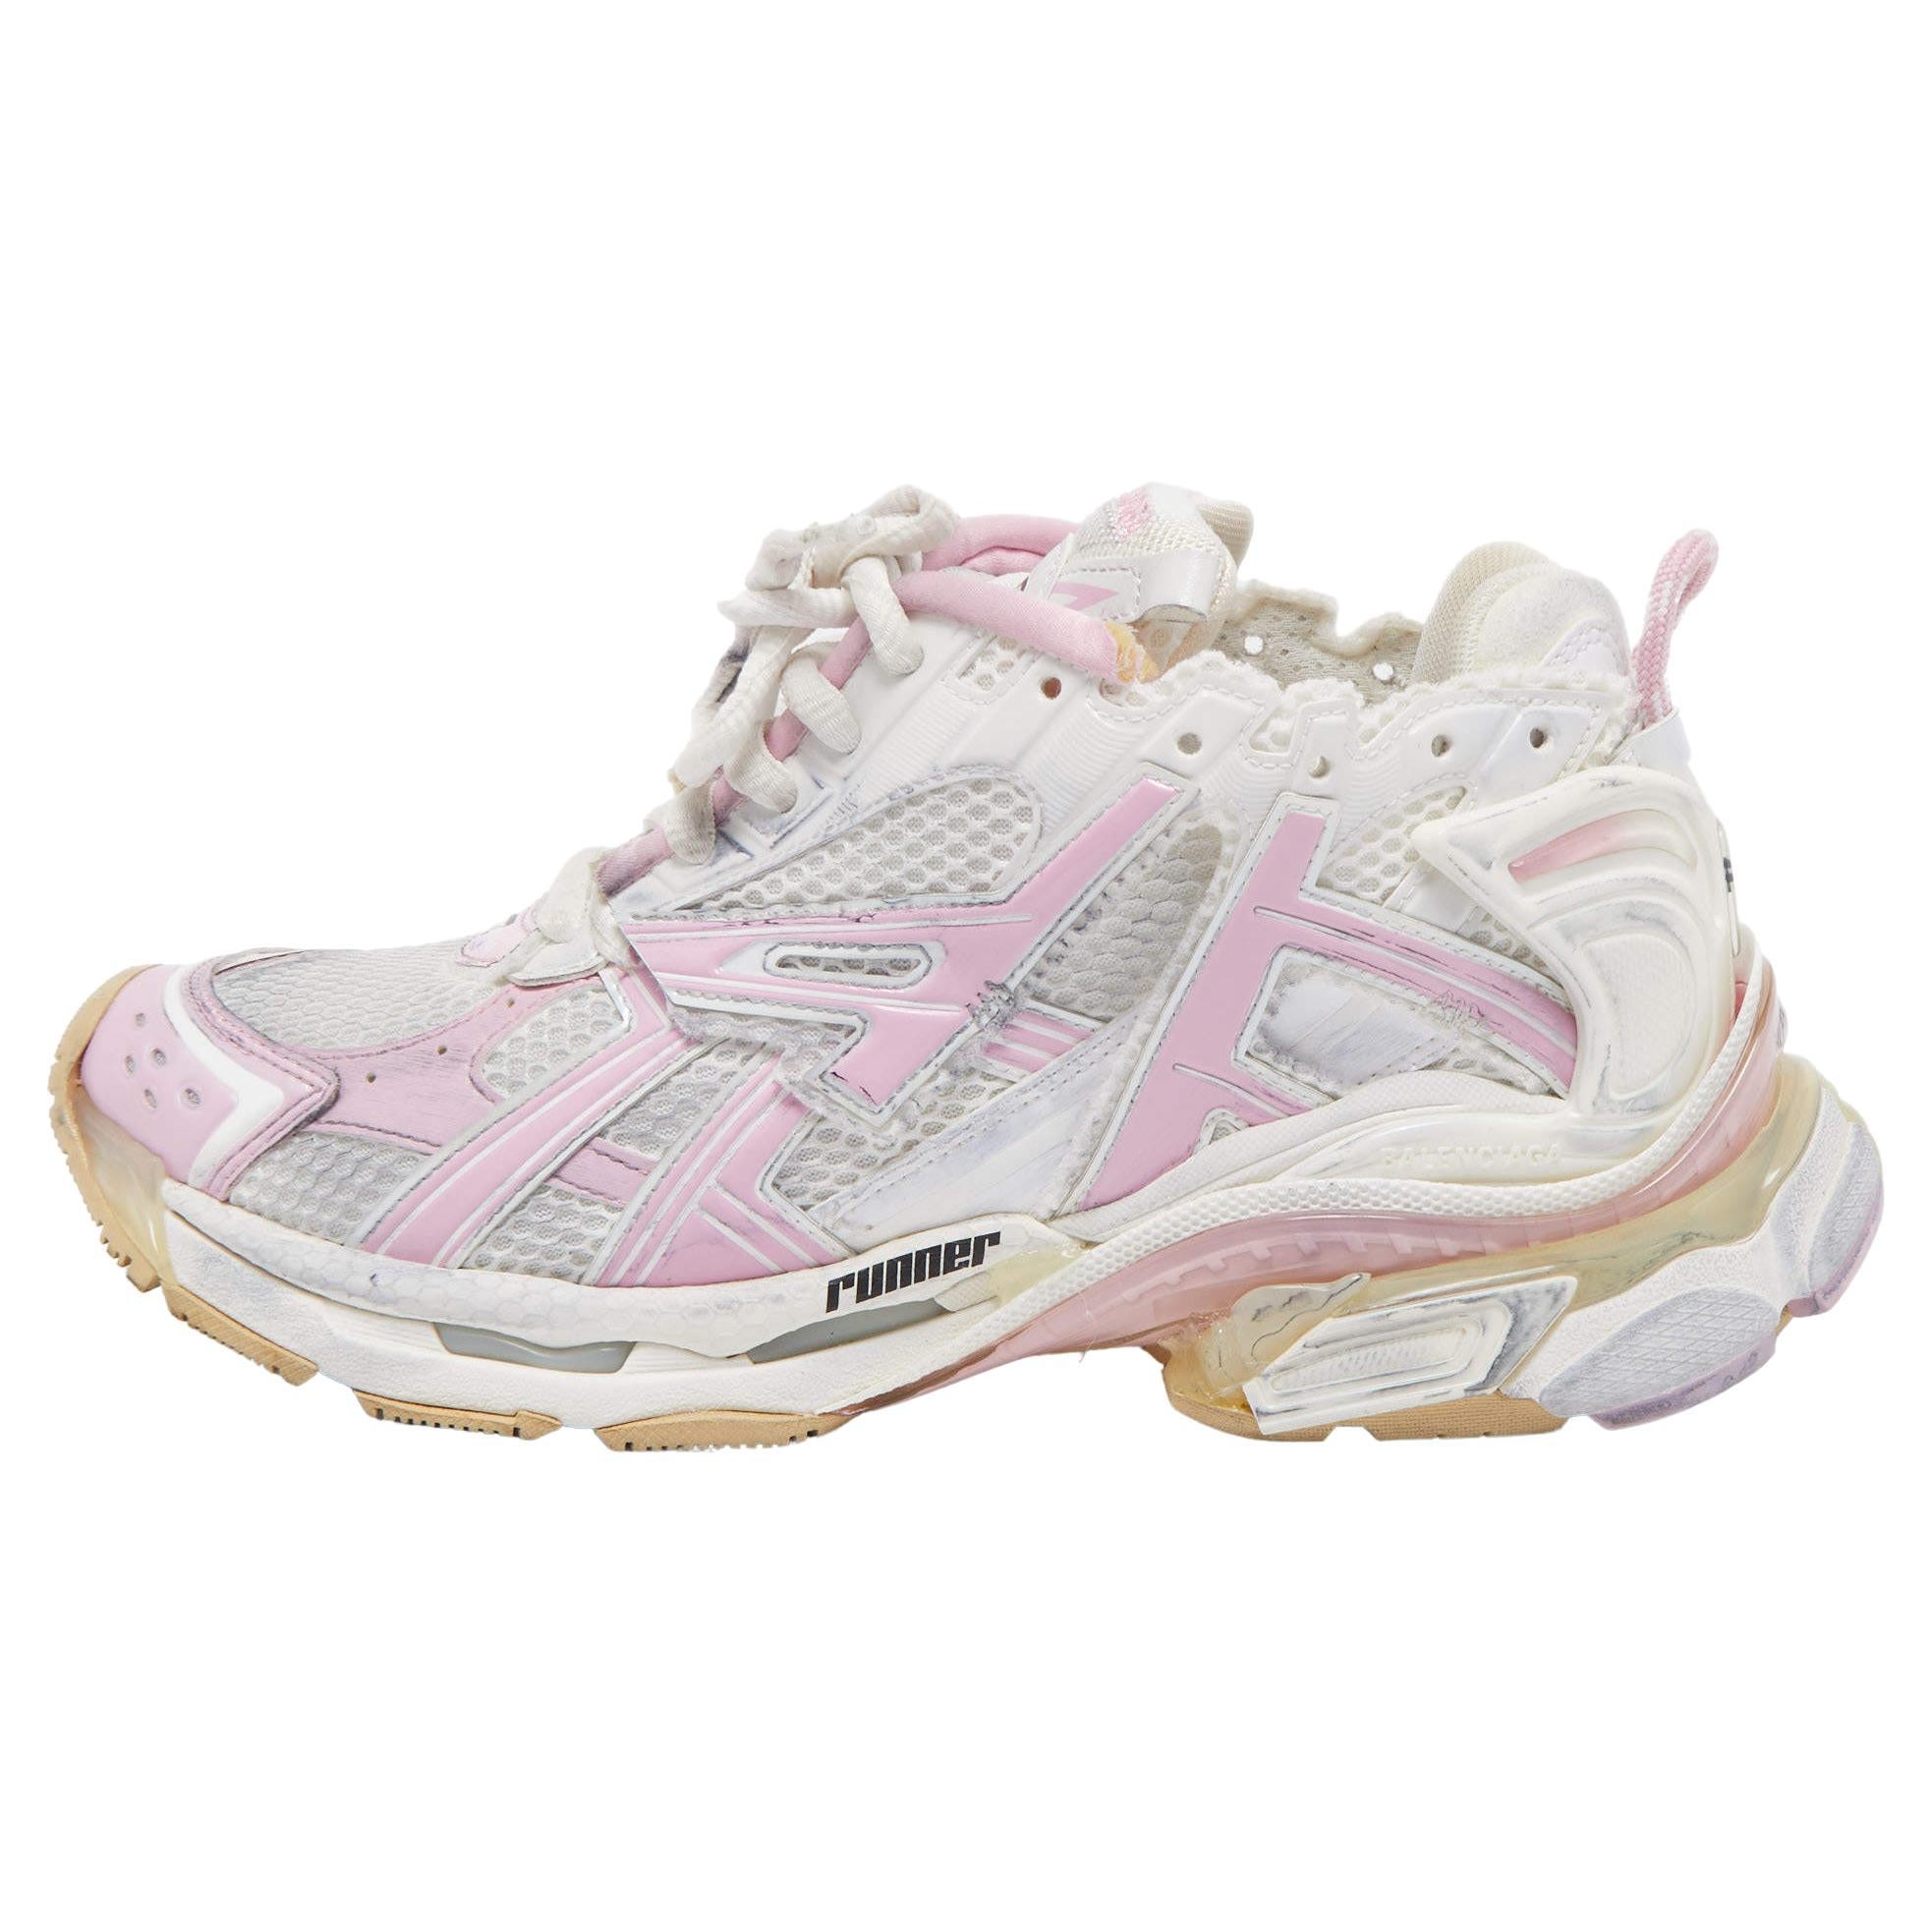 Balenciaga White/Pink Fabric and Leather Runner Sneakers Size 40